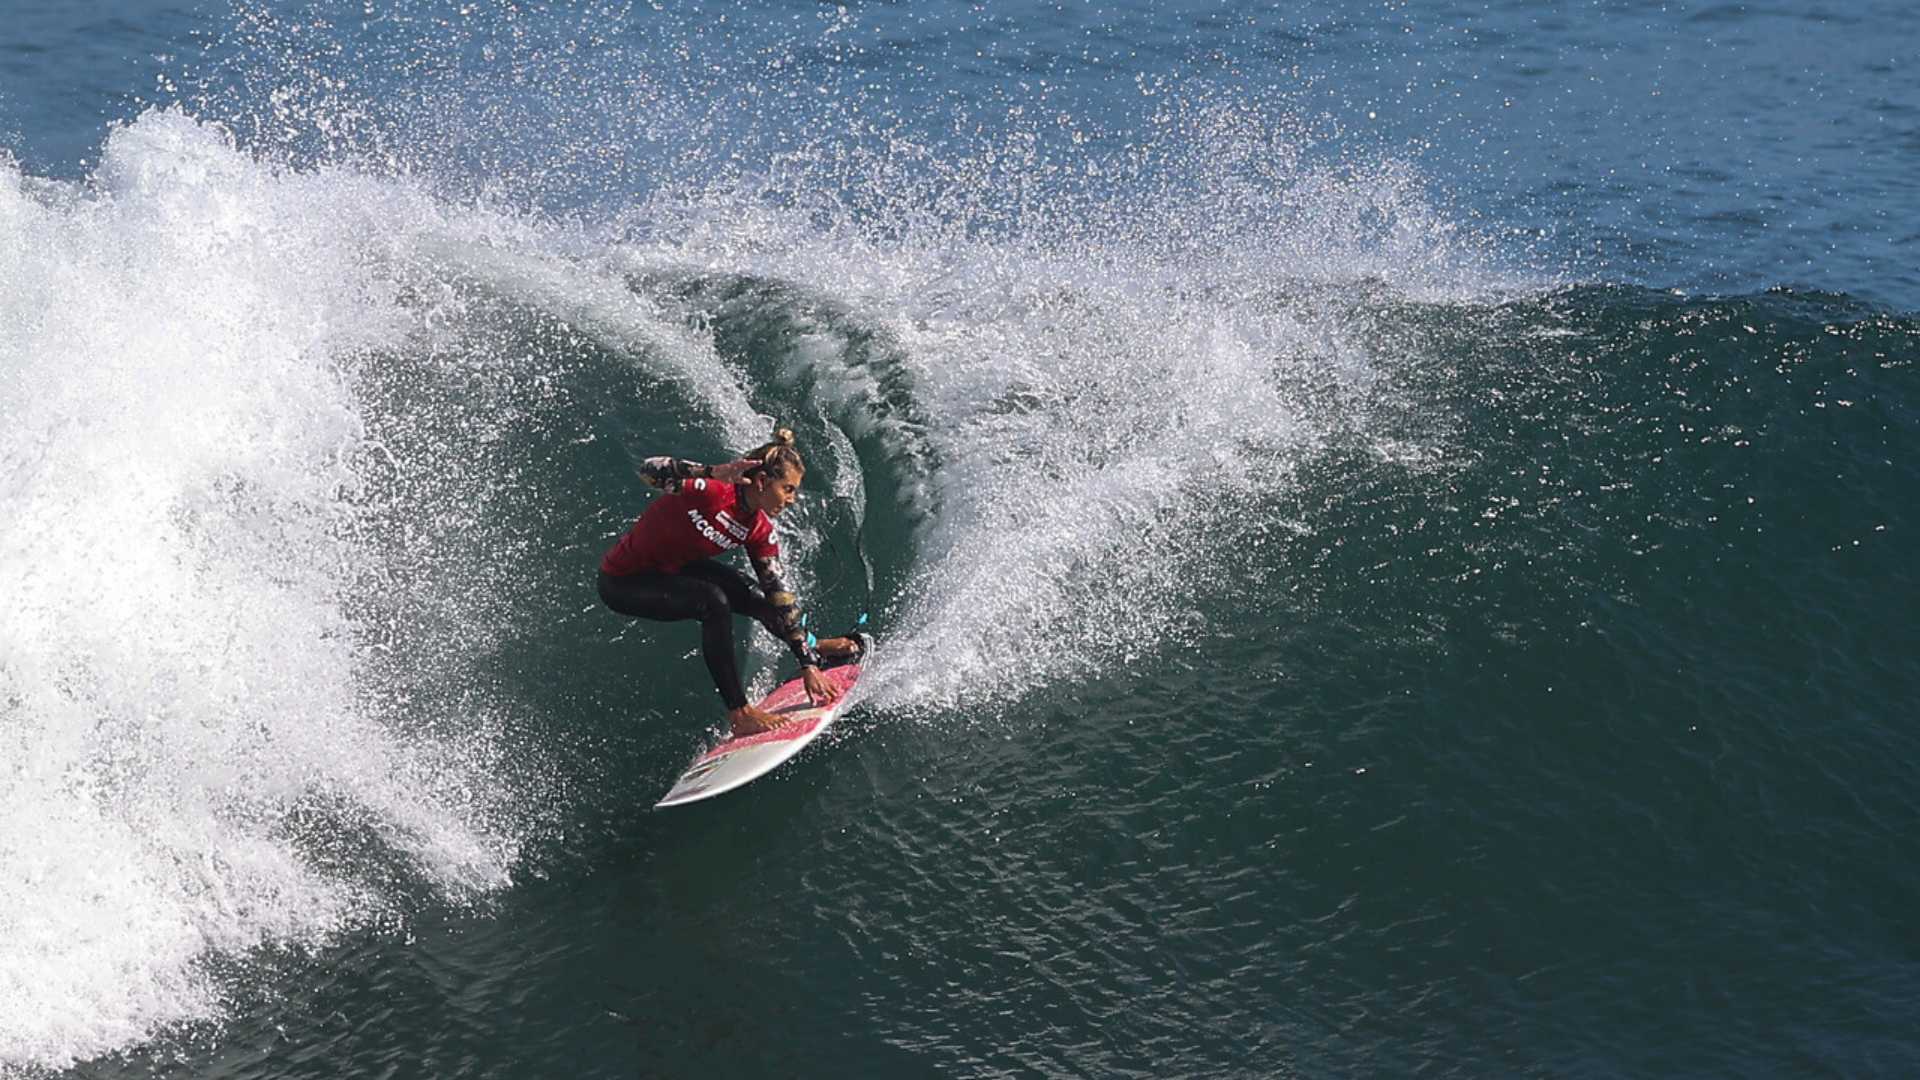 The Pan American surfing competition kicked off with longboard qualifications